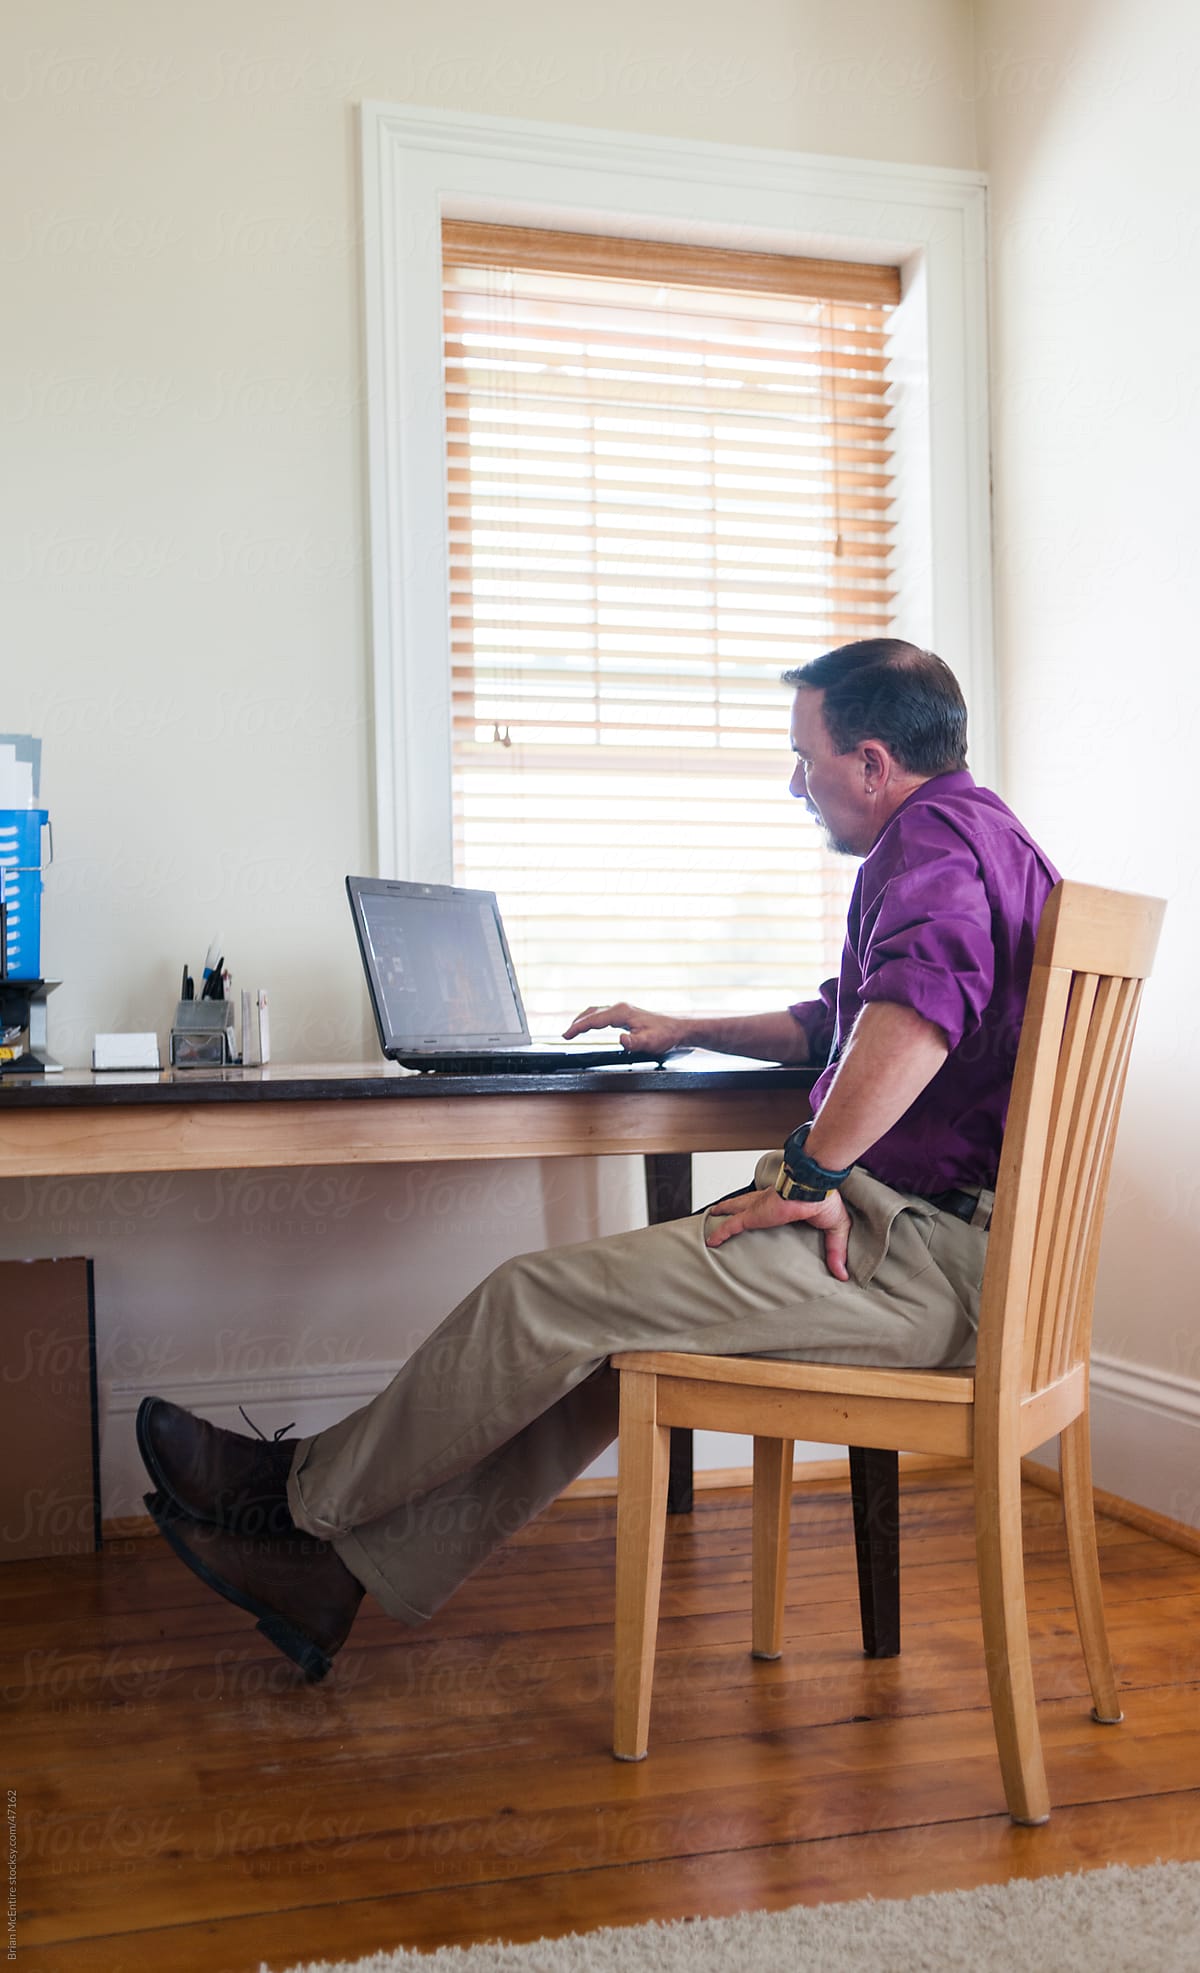 Office Culture: Relaxed Attire Worn By Man in Residential Space